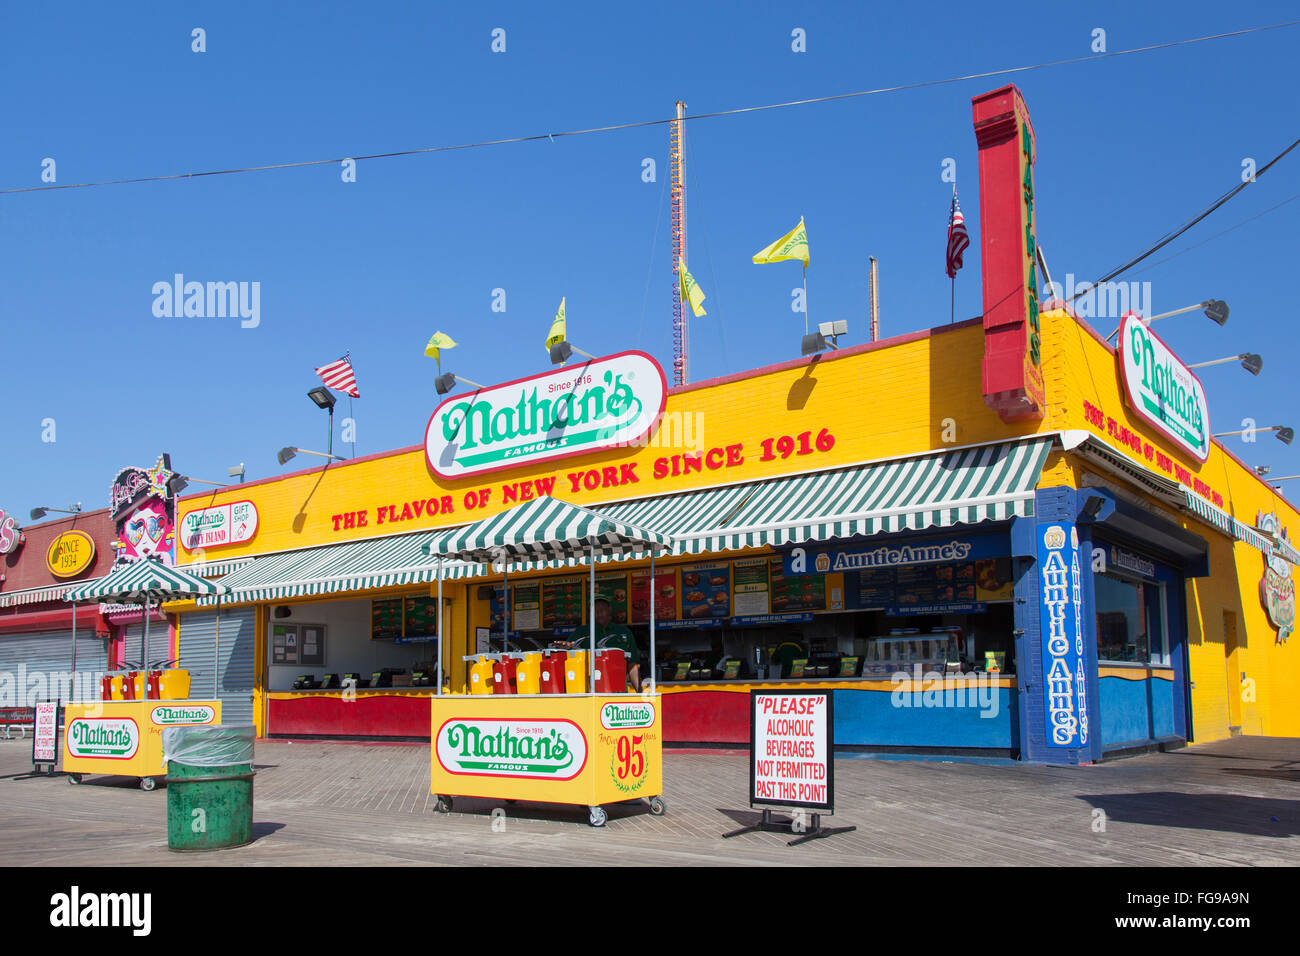 new york city, 15 september 2015: nathan's famous restaurant in bright colors on coney island on sunny morning Stock Photo